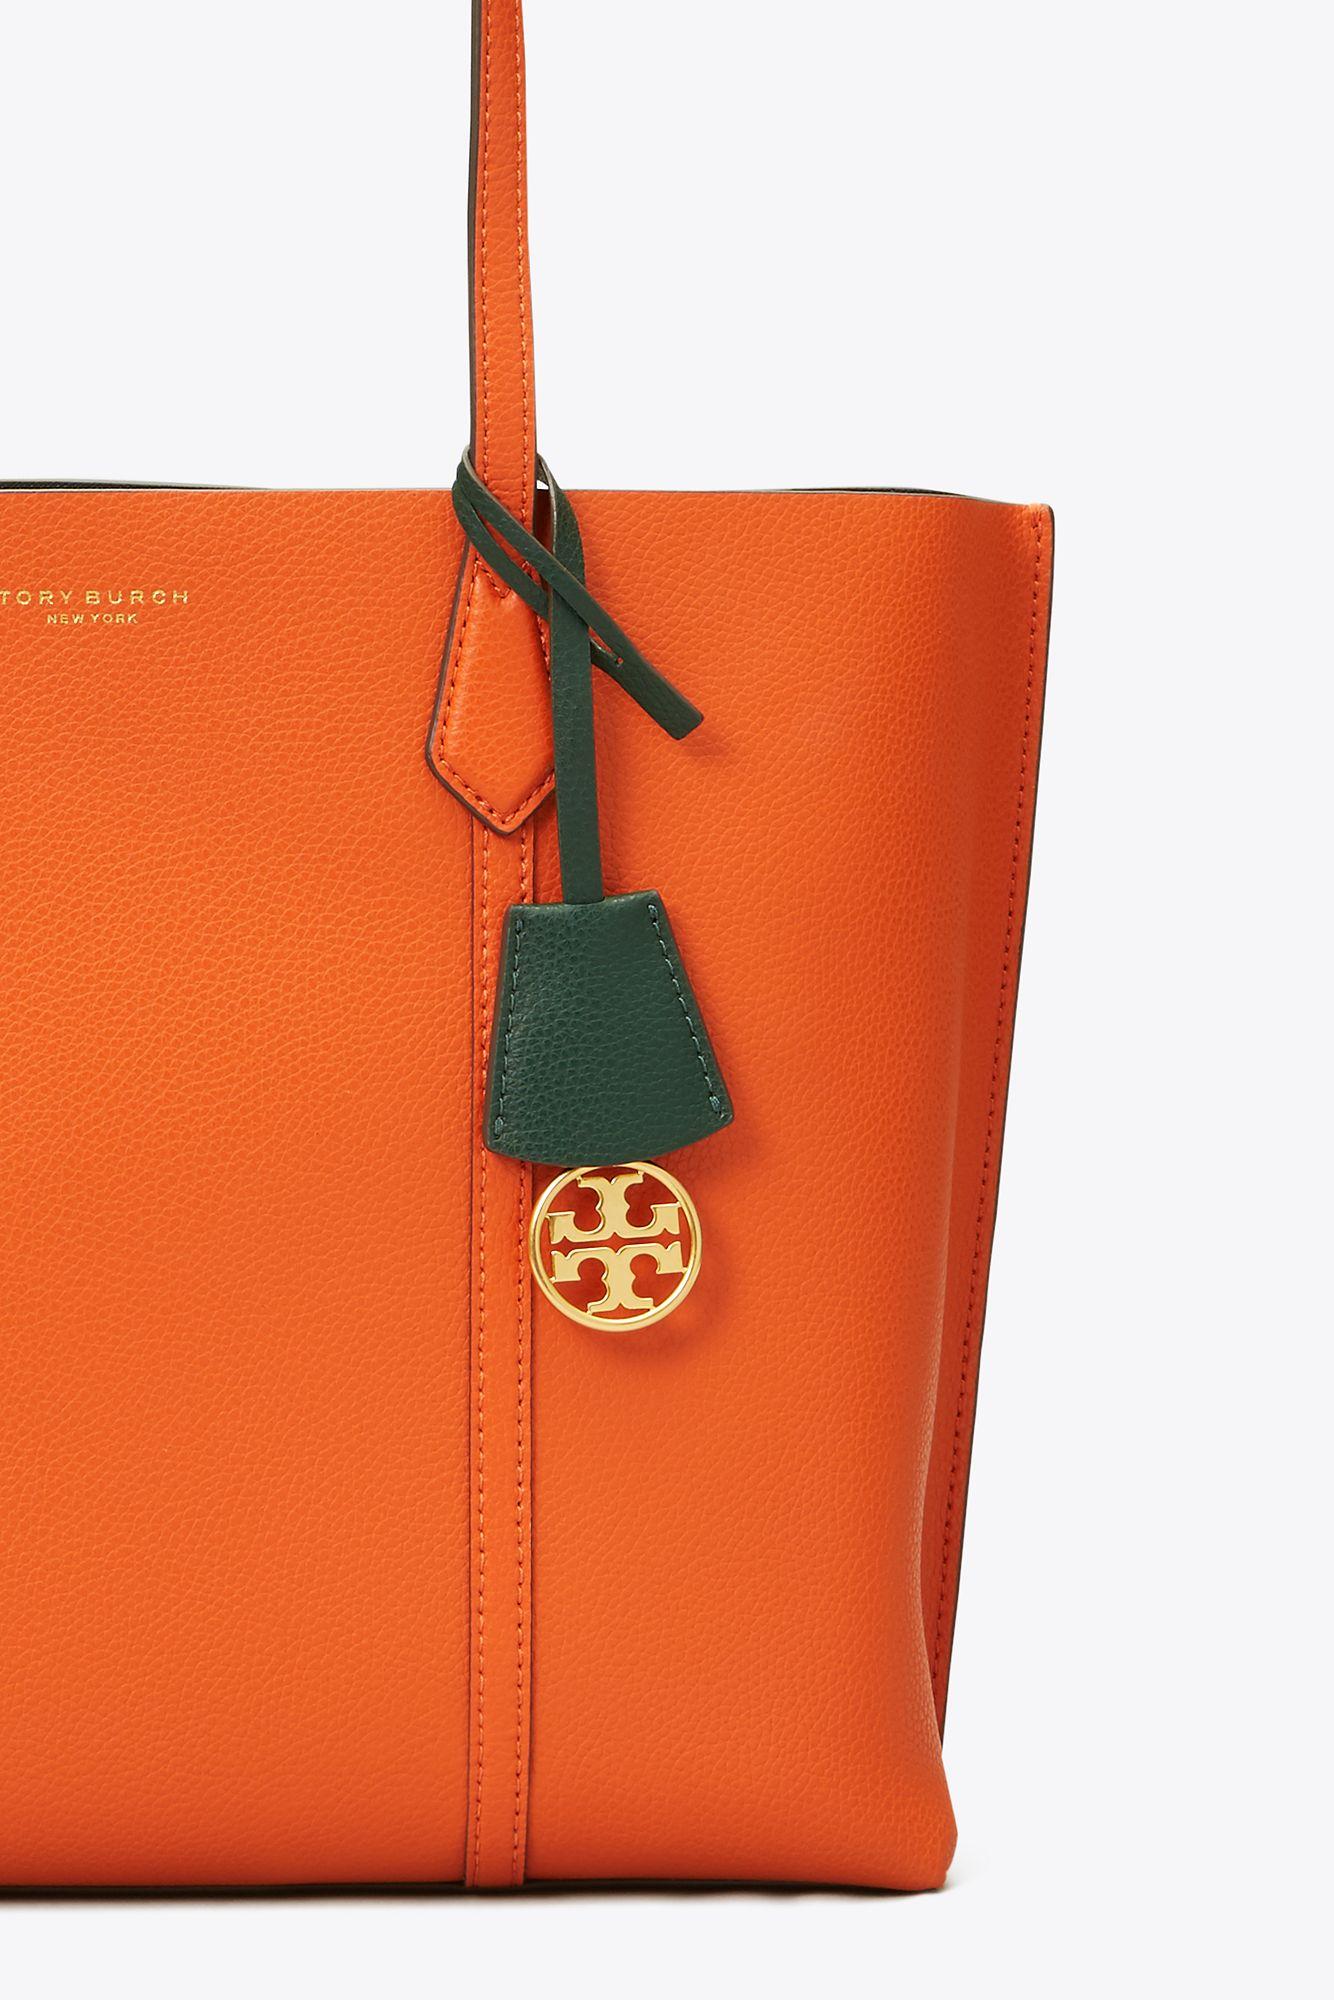 Tory Burch Perry Leather Tote Bag in Orange | Lyst UK